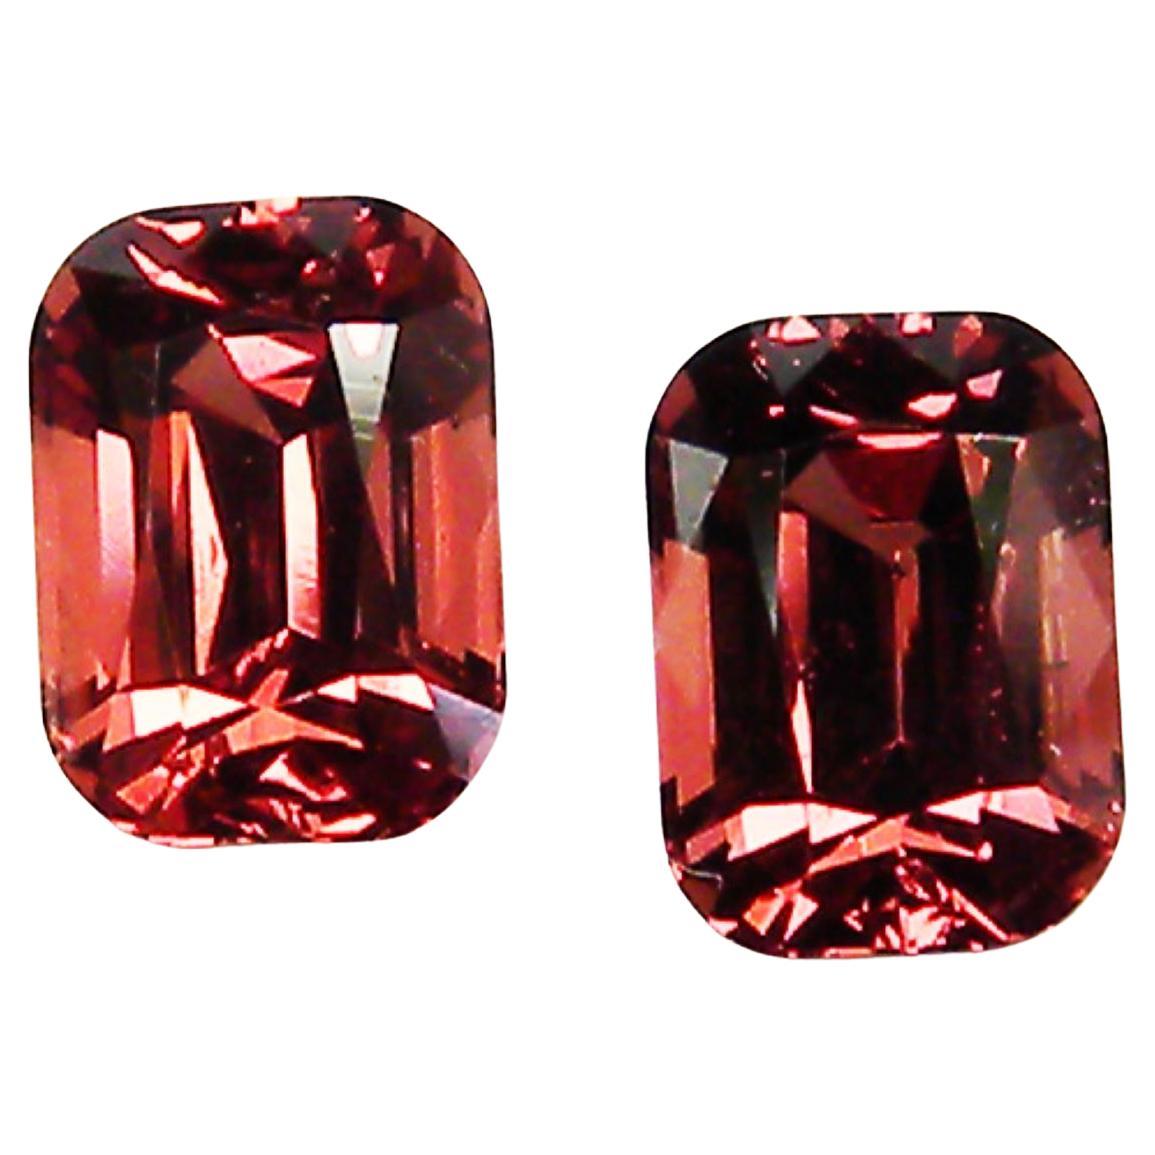 2 Red Spinels Cts 2.11 For Sale